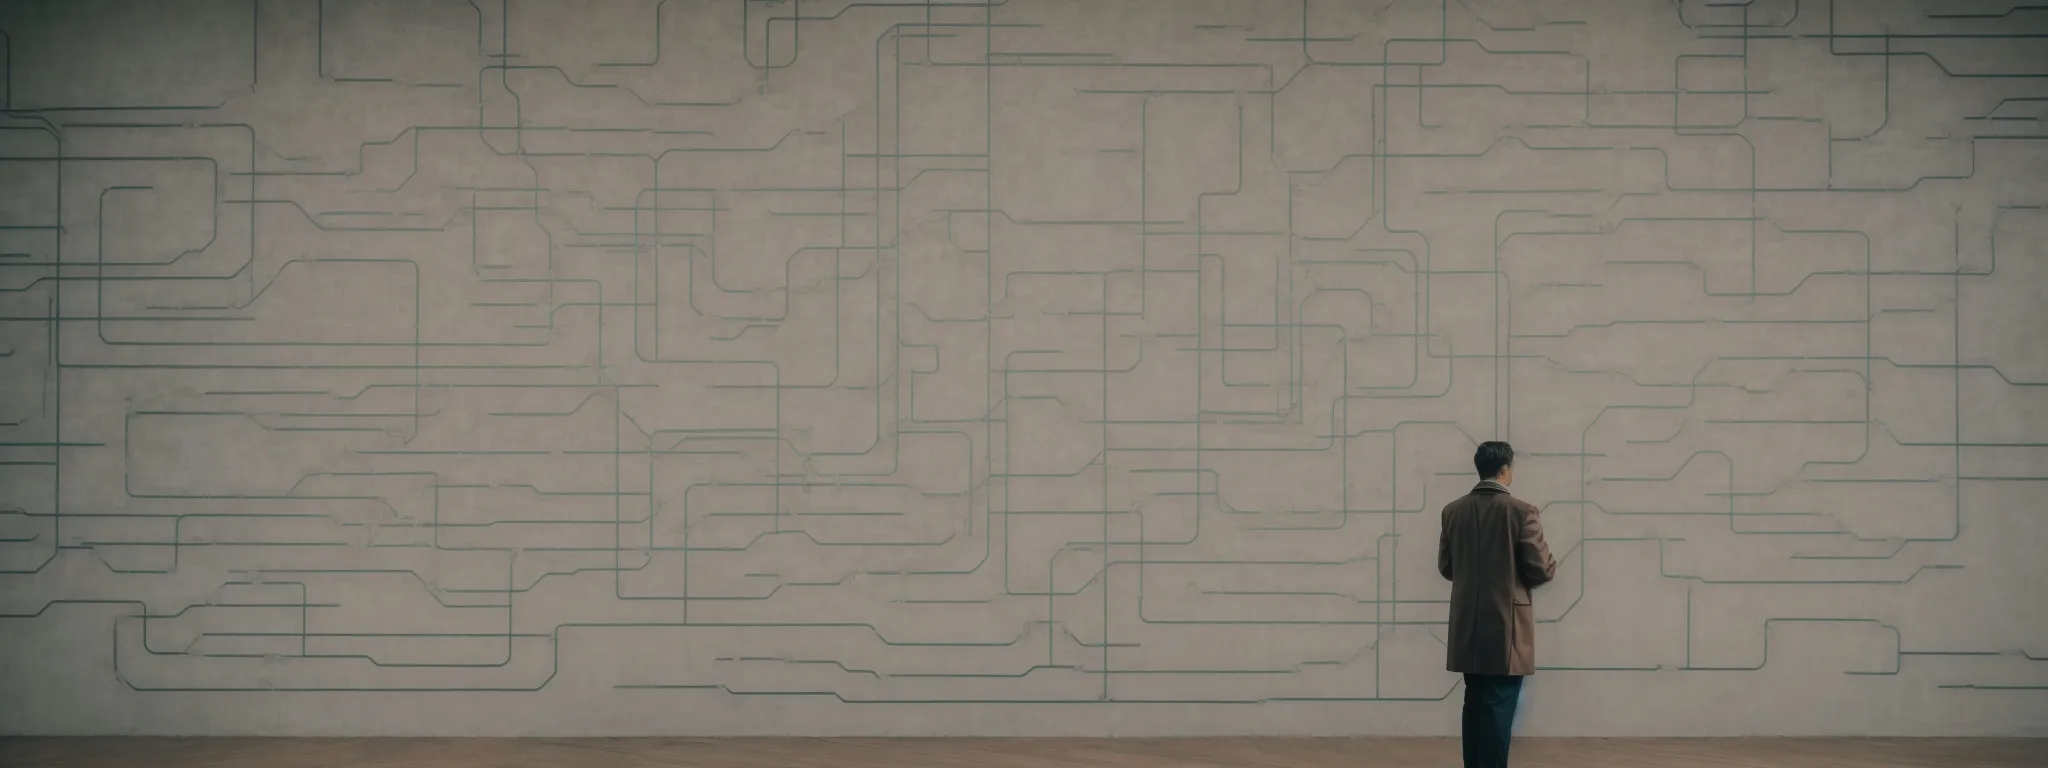 a person standing in front of a large, maze-like flowchart on a wall, analyzing the interconnected web of pathways.